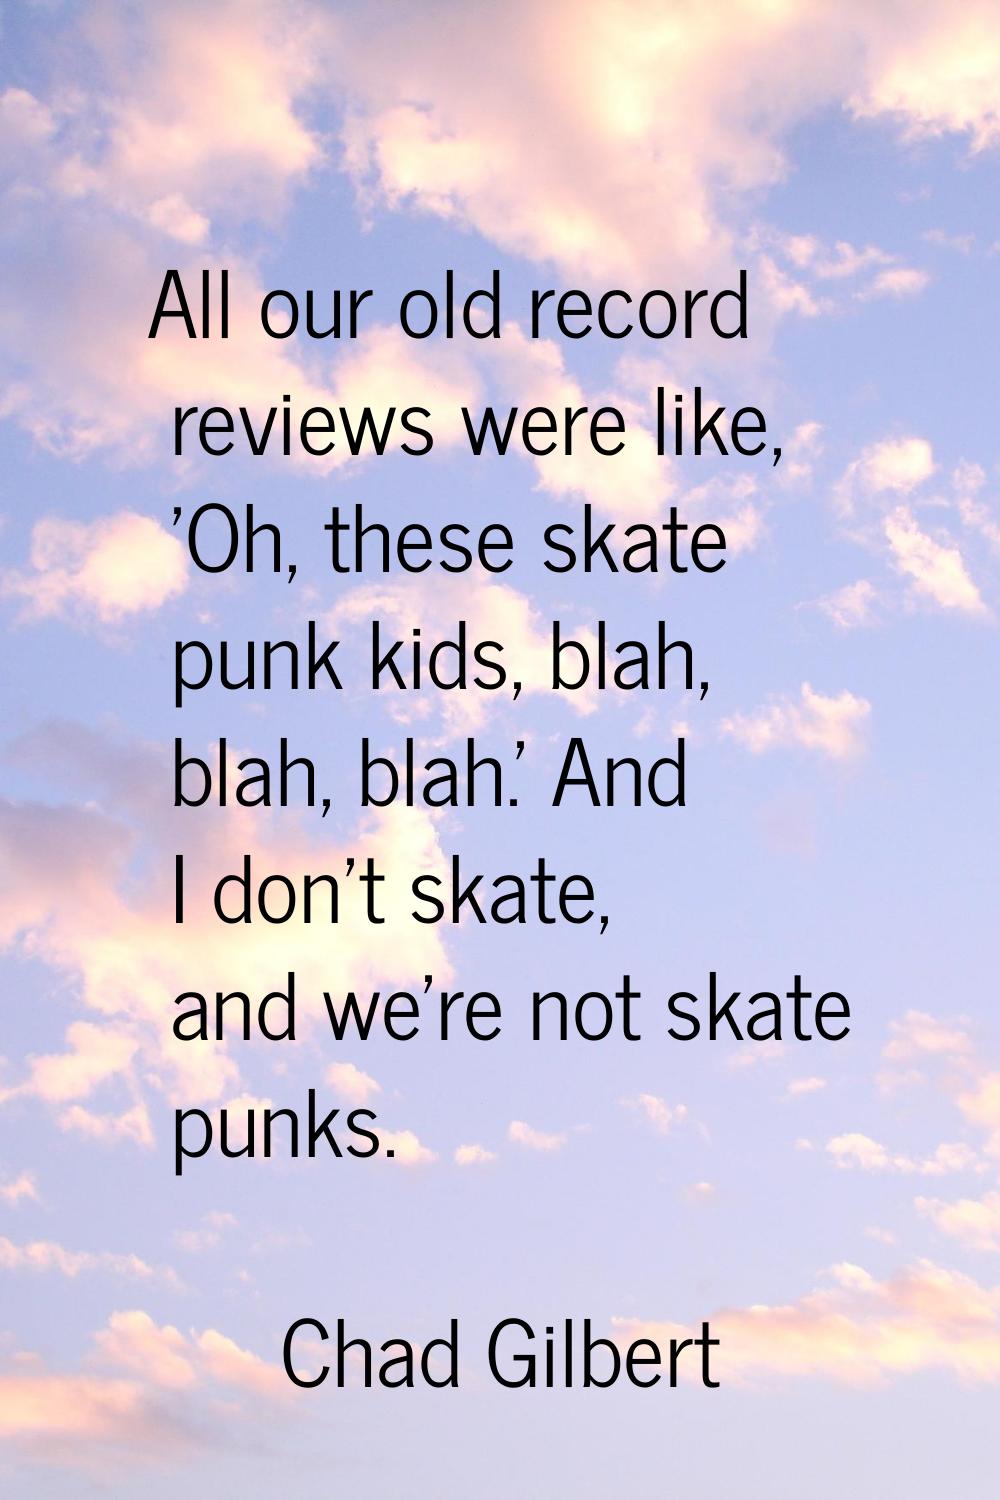 All our old record reviews were like, 'Oh, these skate punk kids, blah, blah, blah.' And I don't sk